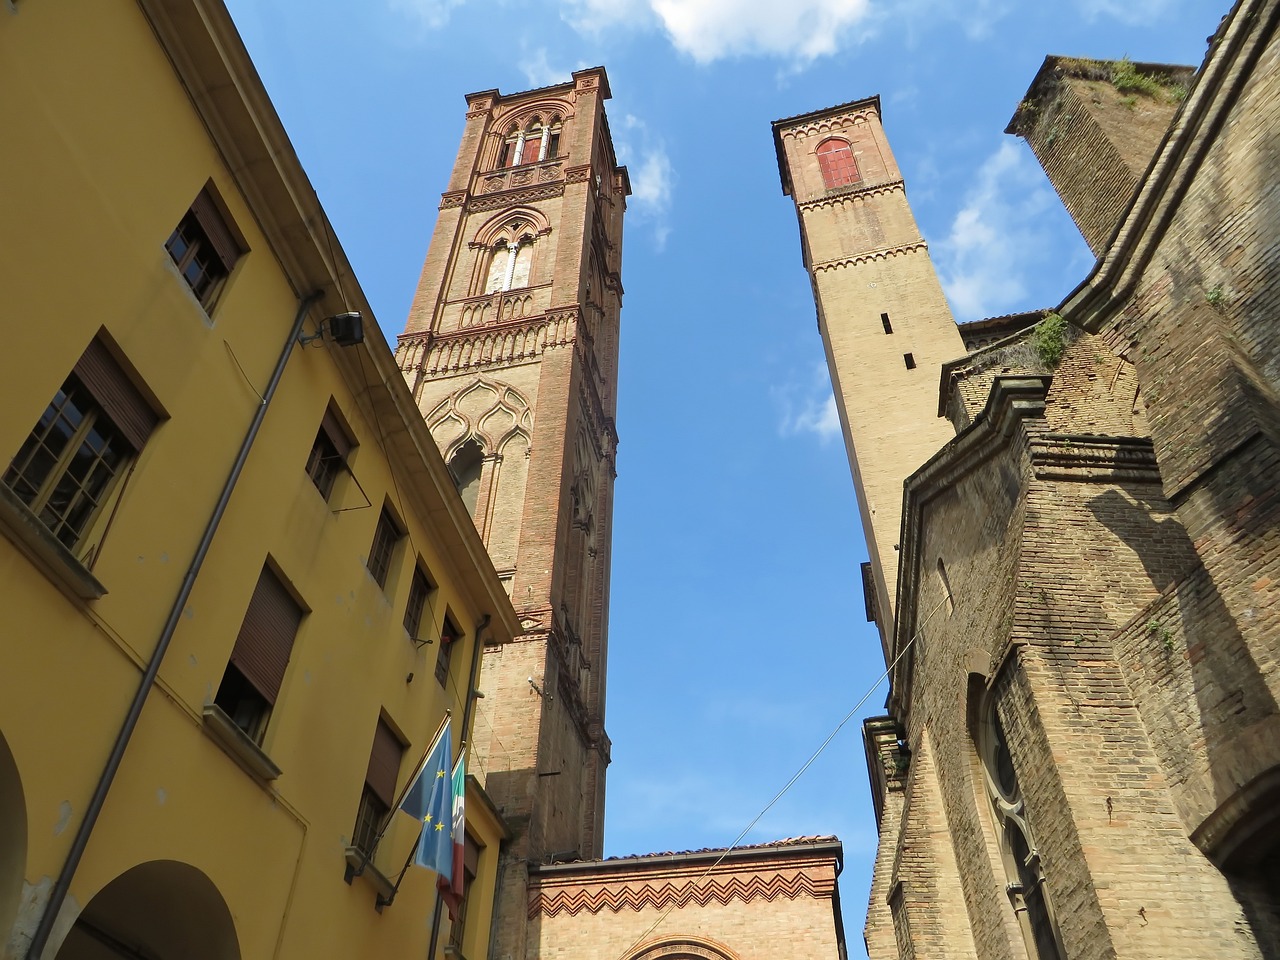 And finally... Plan to straighten up Bologna's leaning tower